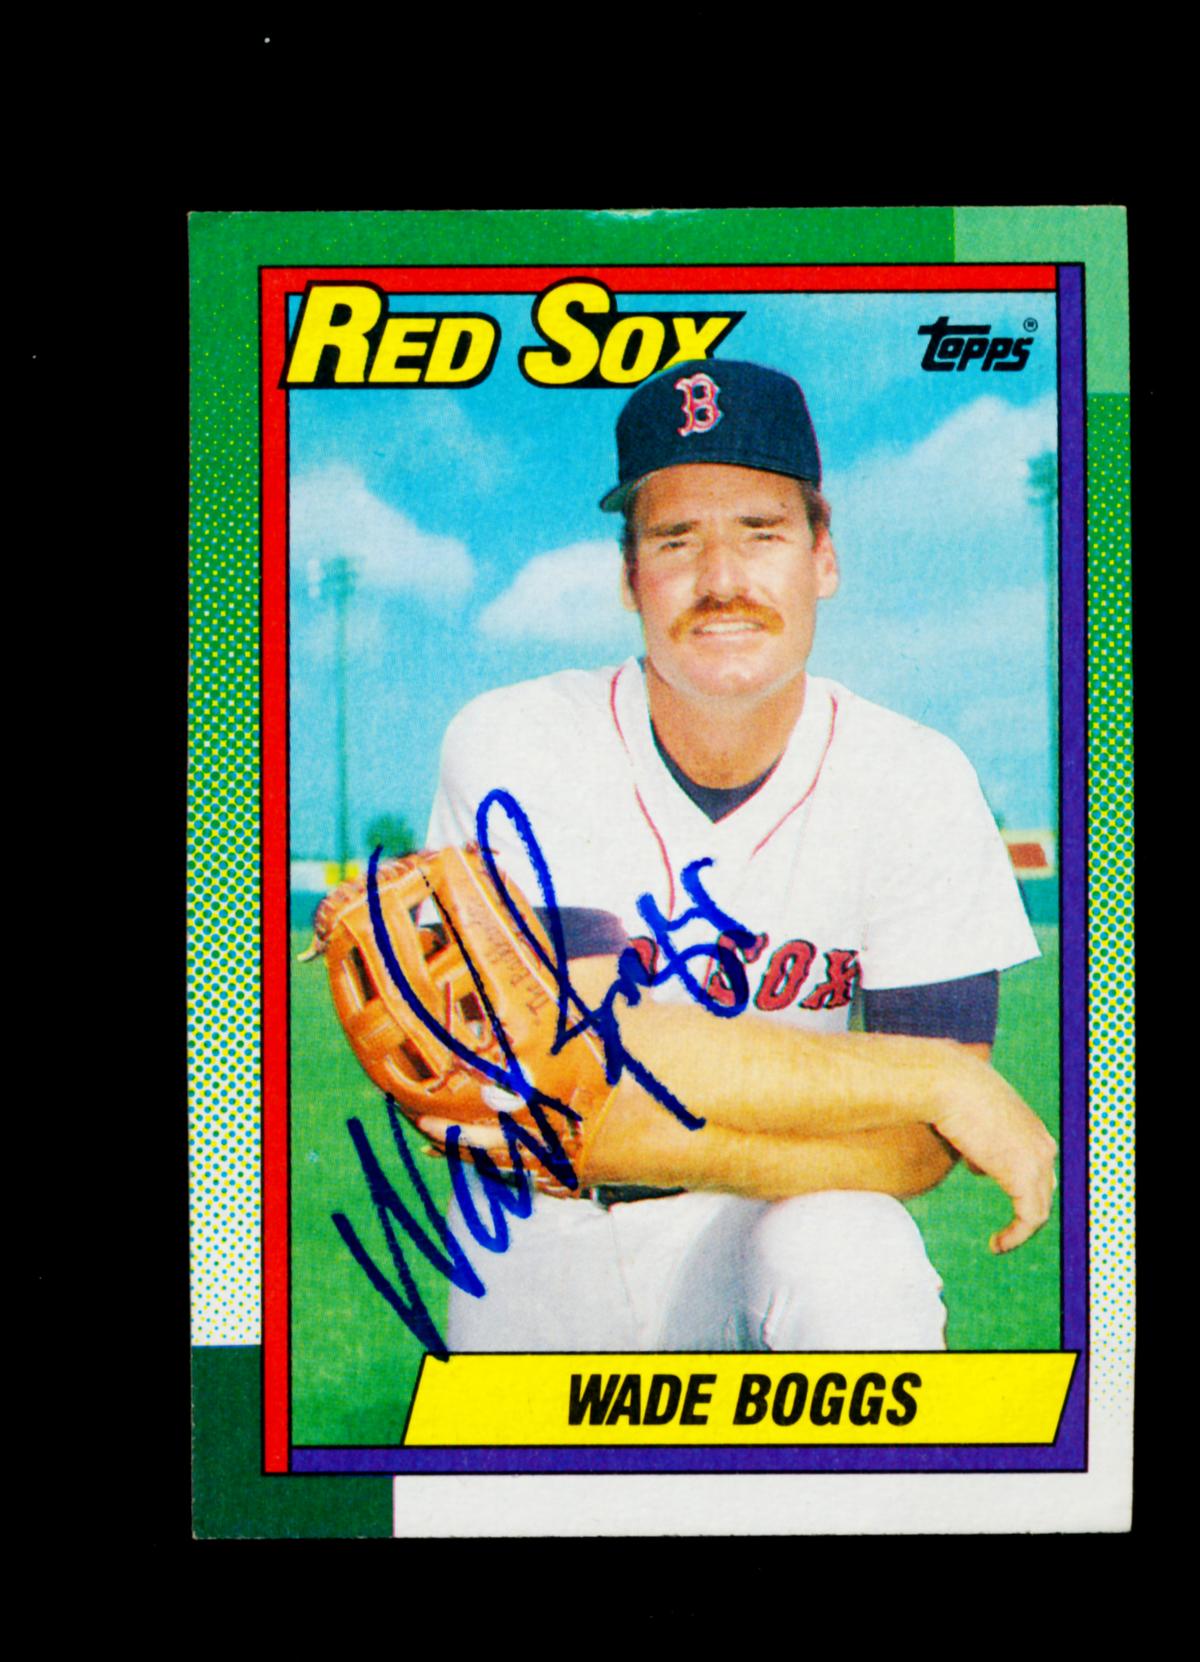 1990 Topps bseball Card #760 Hall of Famer Wade Boggs Boston Red Sox